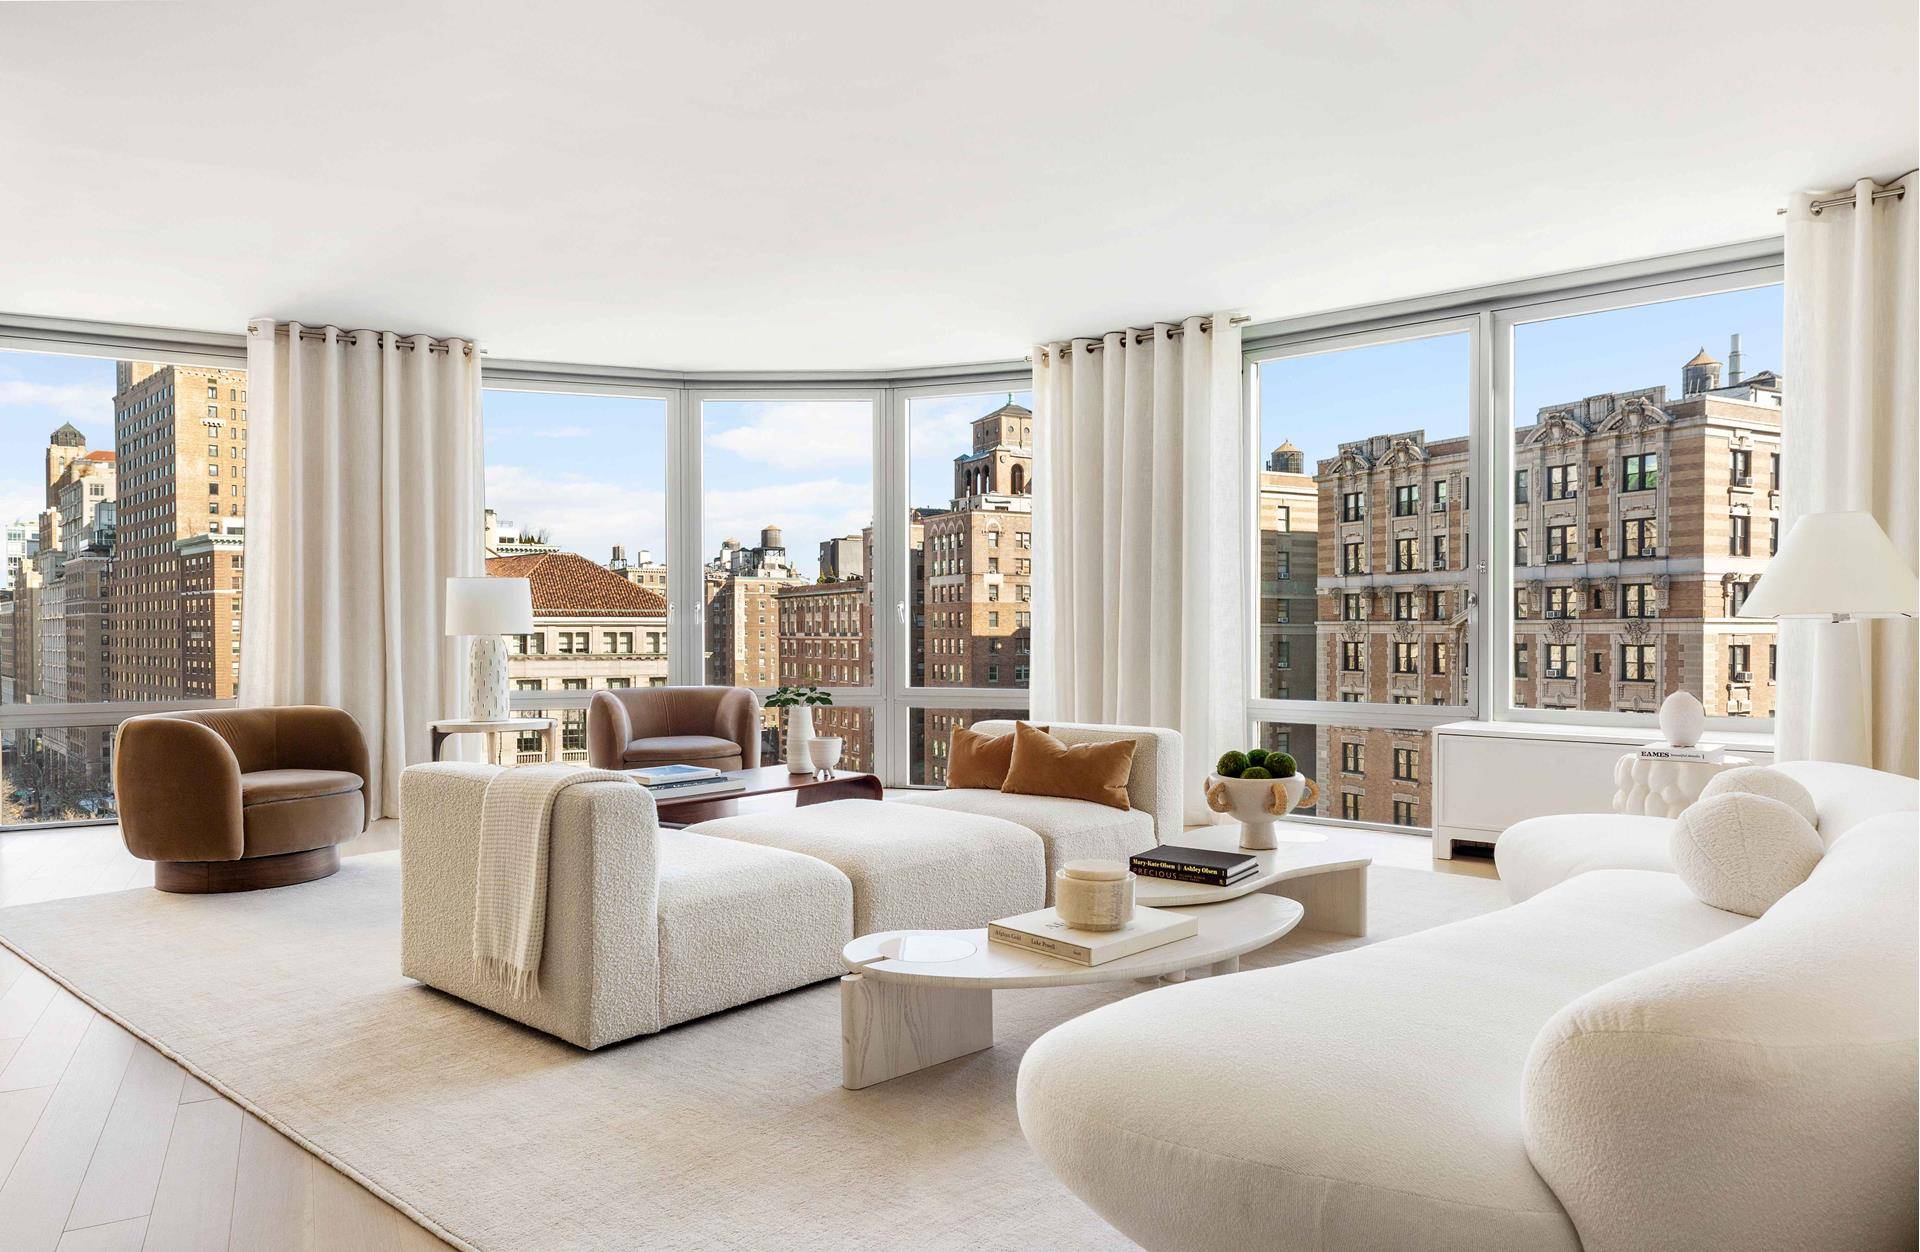 This beautiful 2, 589 square foot, 4 bedroom, 3 bathroom plus media room boasts gorgeous classic Upper West Side views up Broadway and towards Central Park.